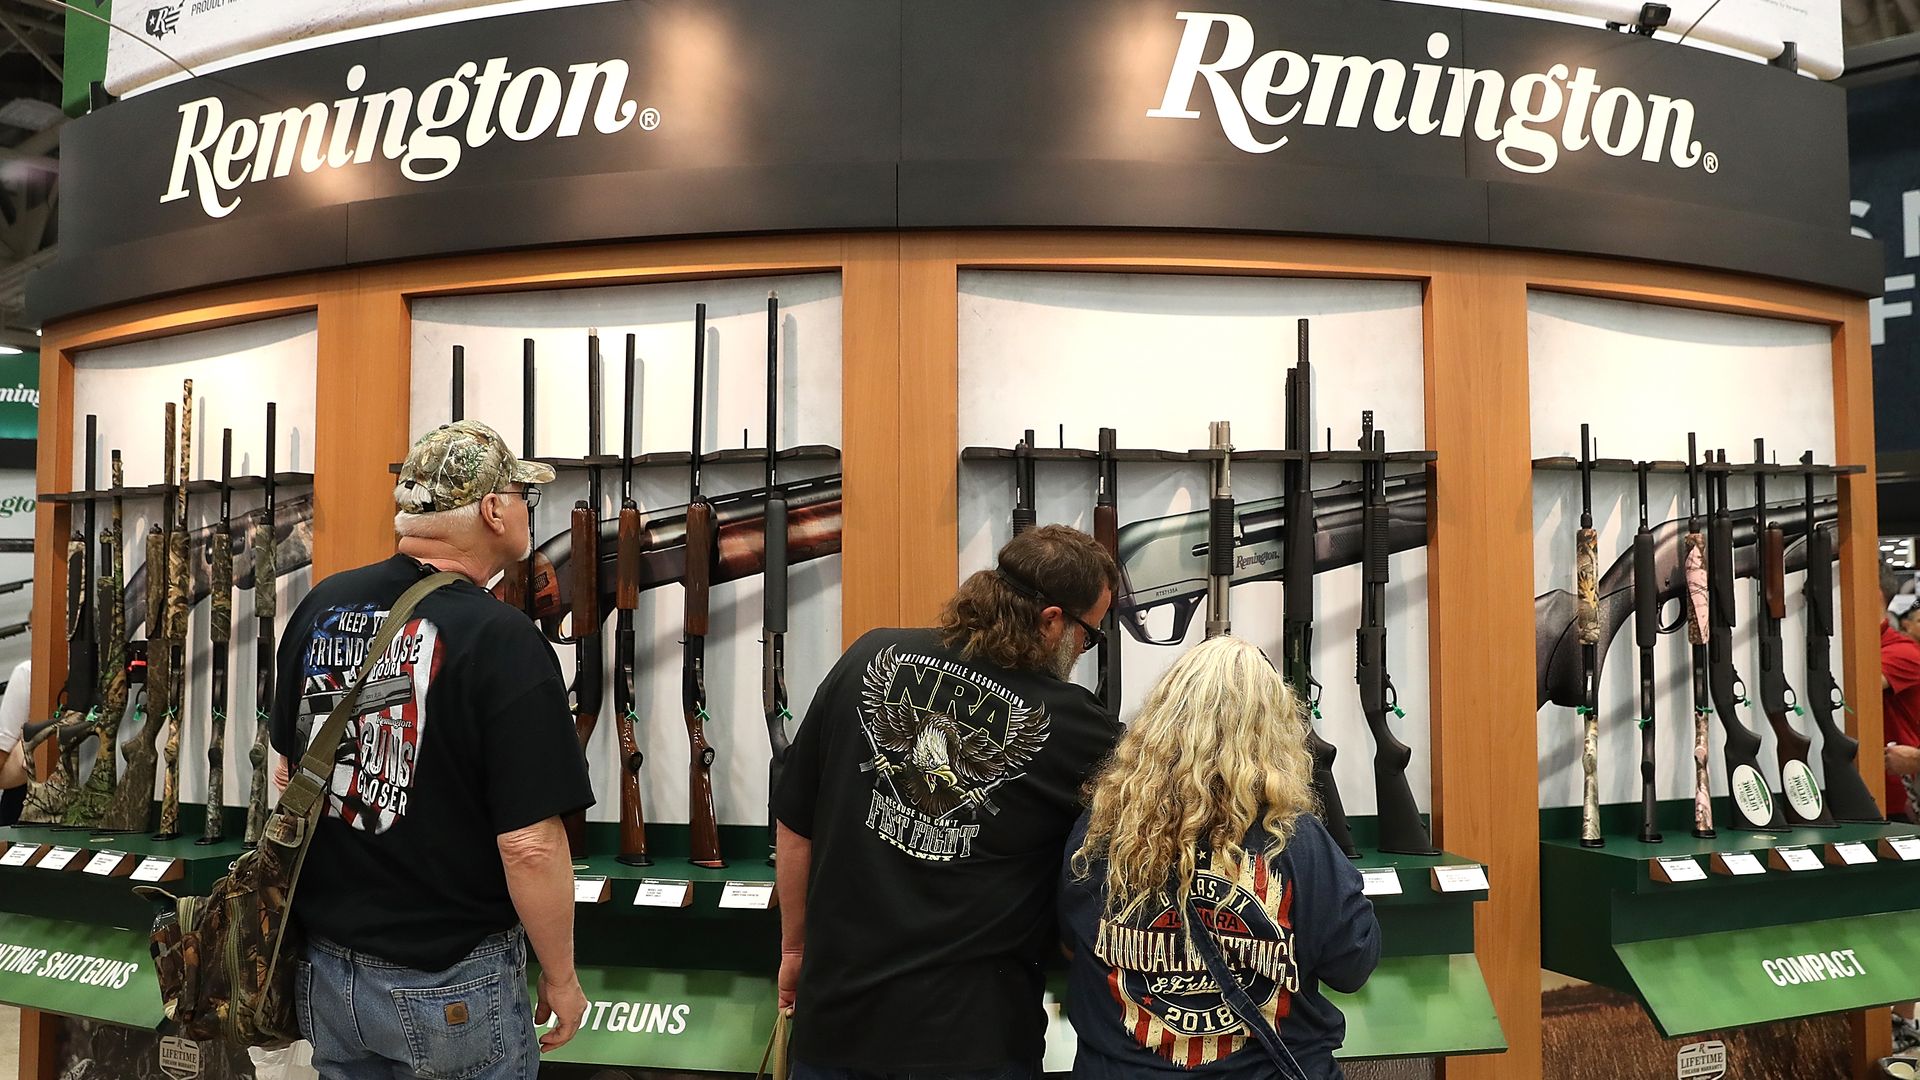 Attendees look at a display of Remington shotguns during the NRA Annual Meeting & Exhibits at the Kay Bailey Hutchison Convention Center on May 5, 2018 in Dallas, Texas.